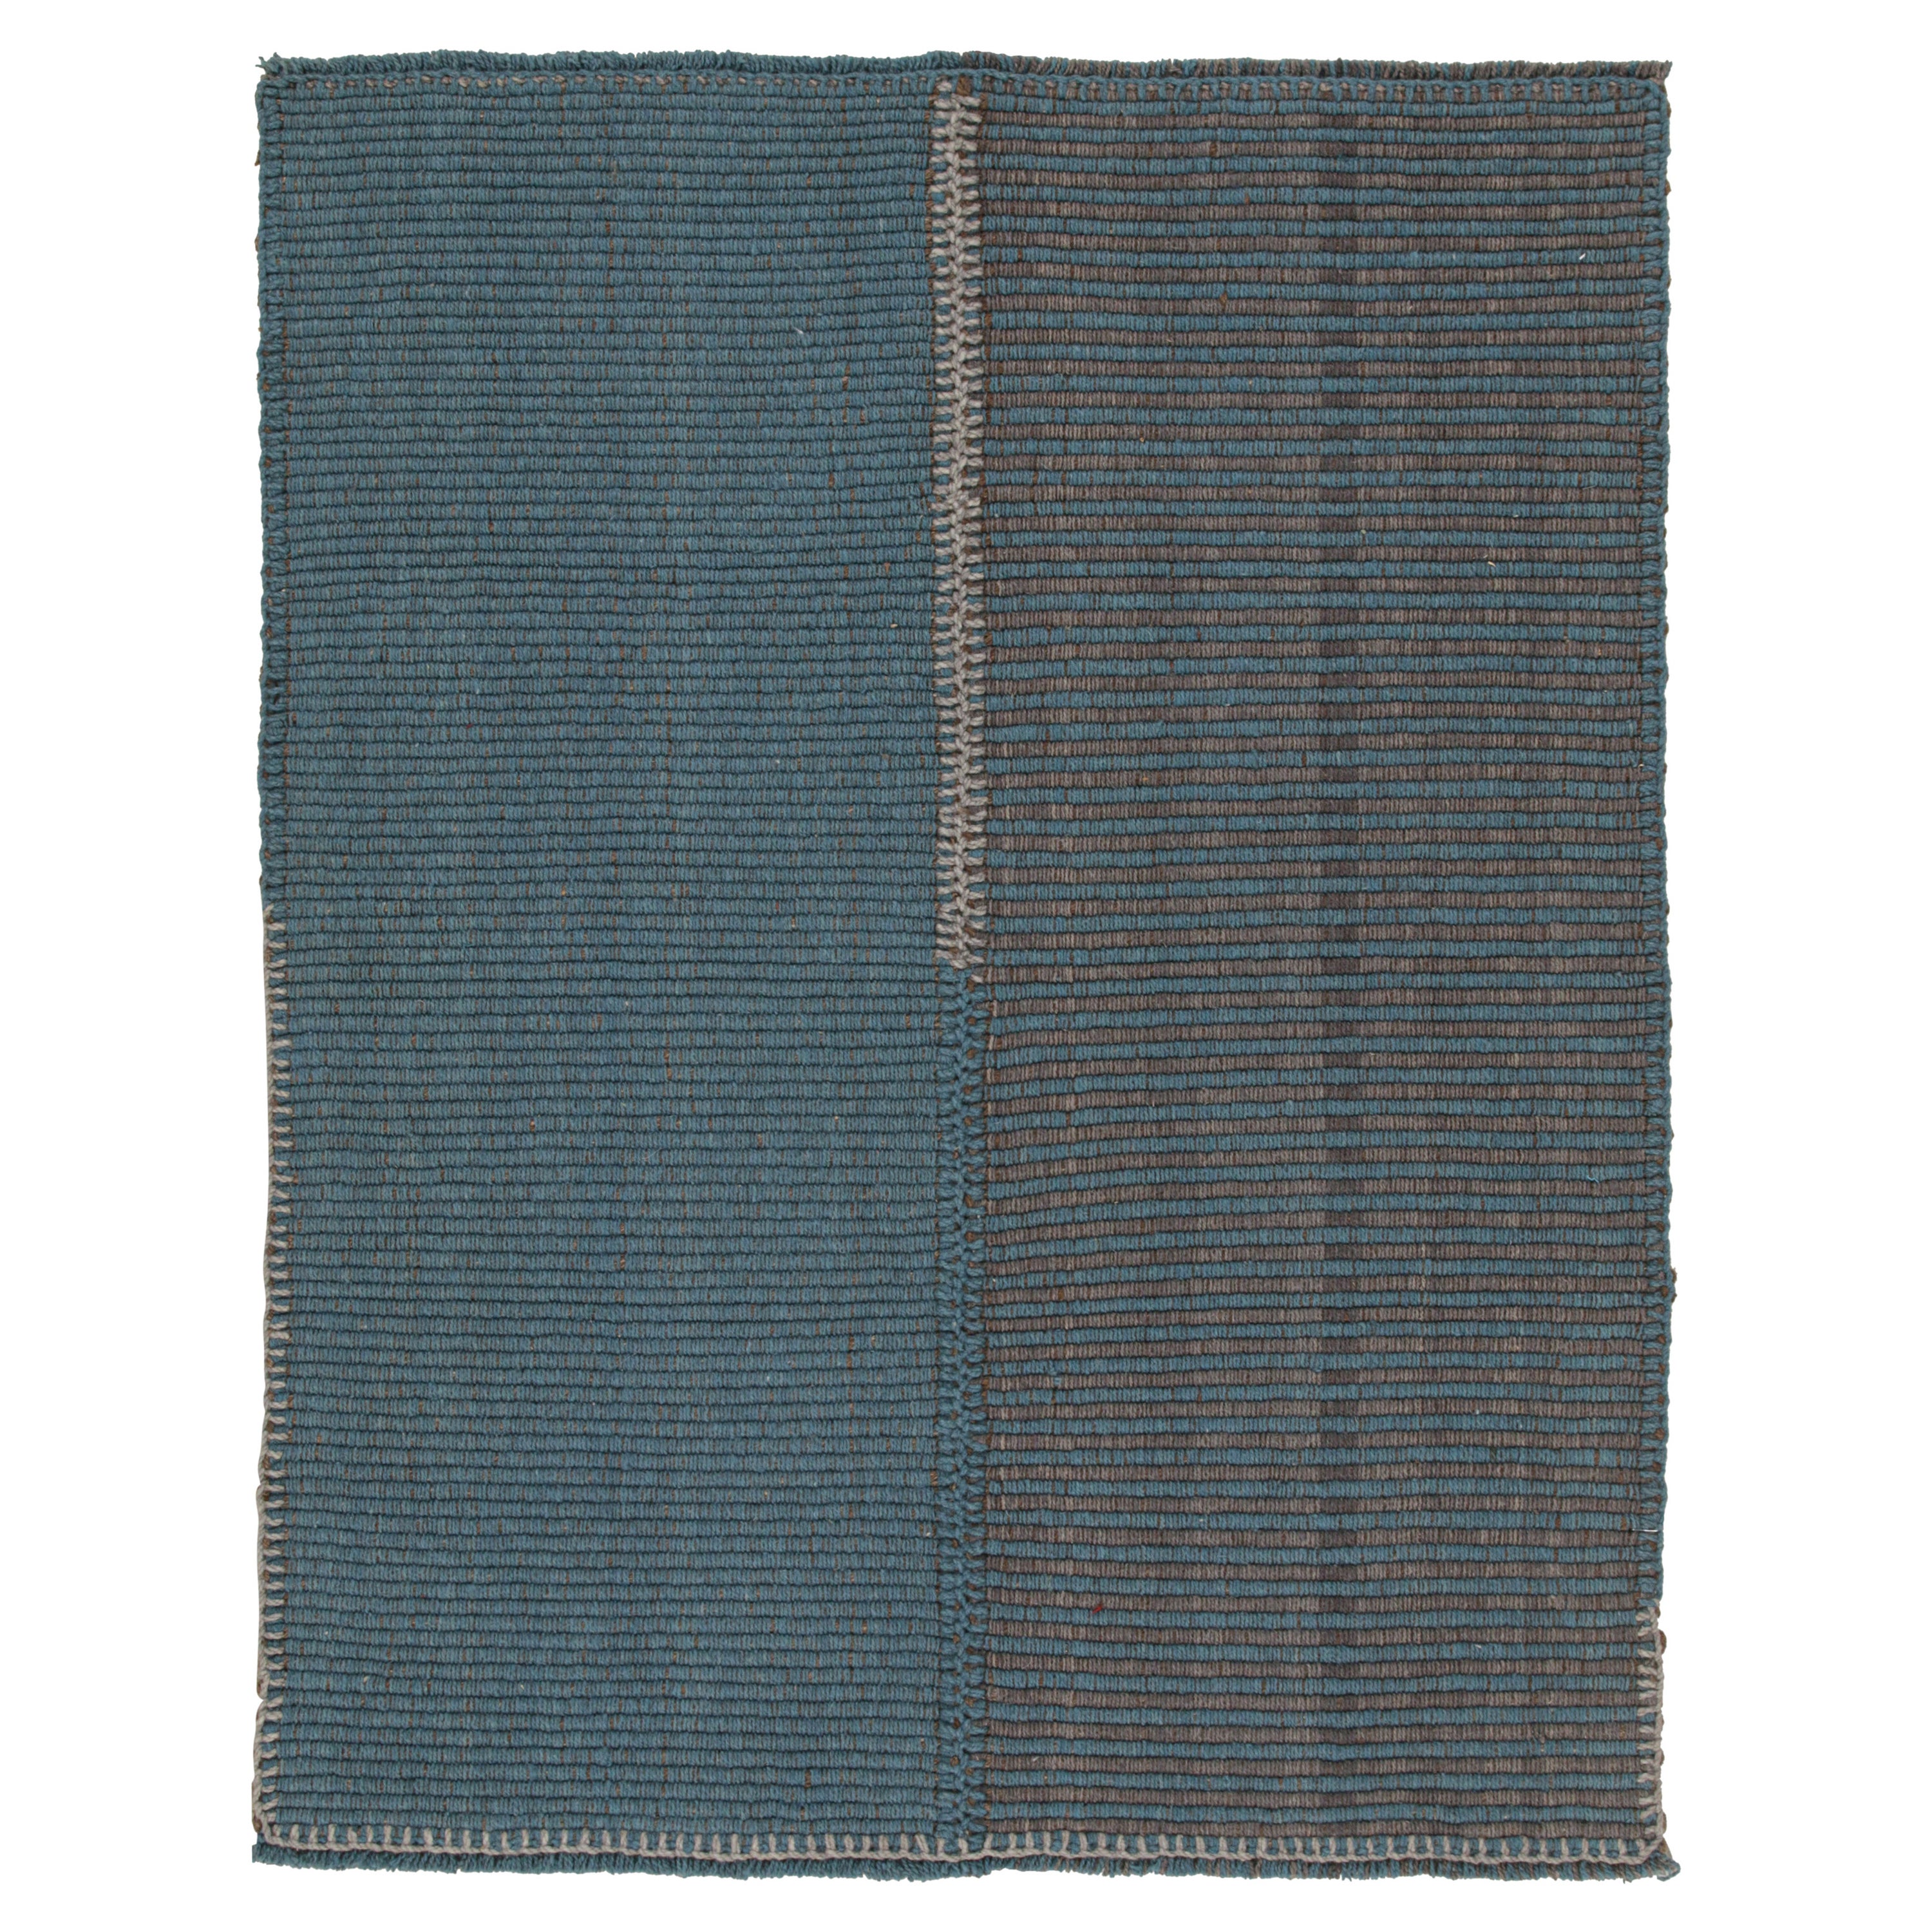 Rug & Kilim’s Contemporary Kilim in Blue and Gray Stripes with Brown Accents